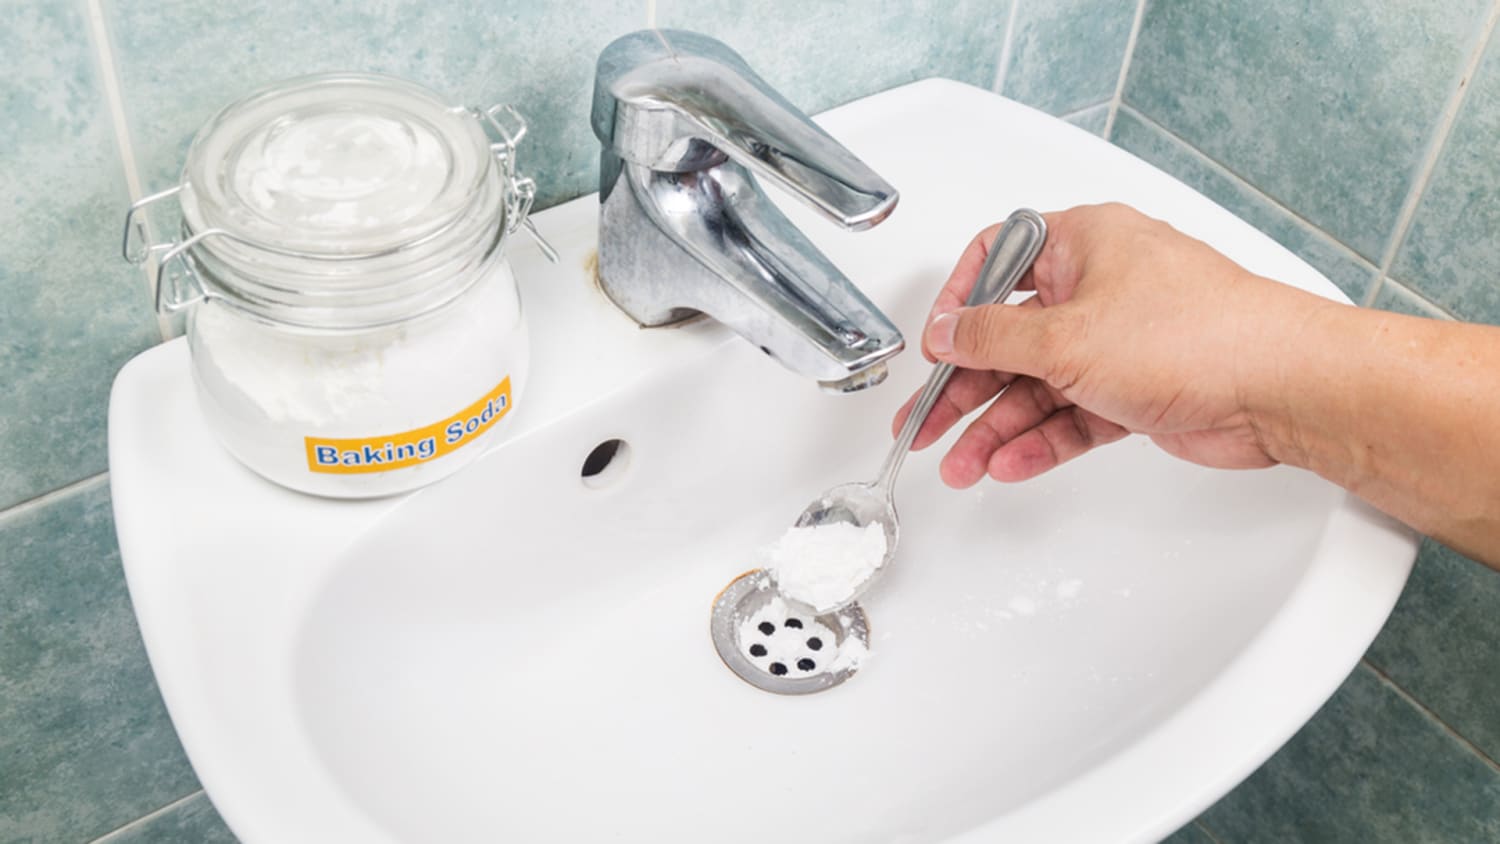 Unclog A Drain Without Calling Plumber, How To Get A Bathtub Drain Unclogged